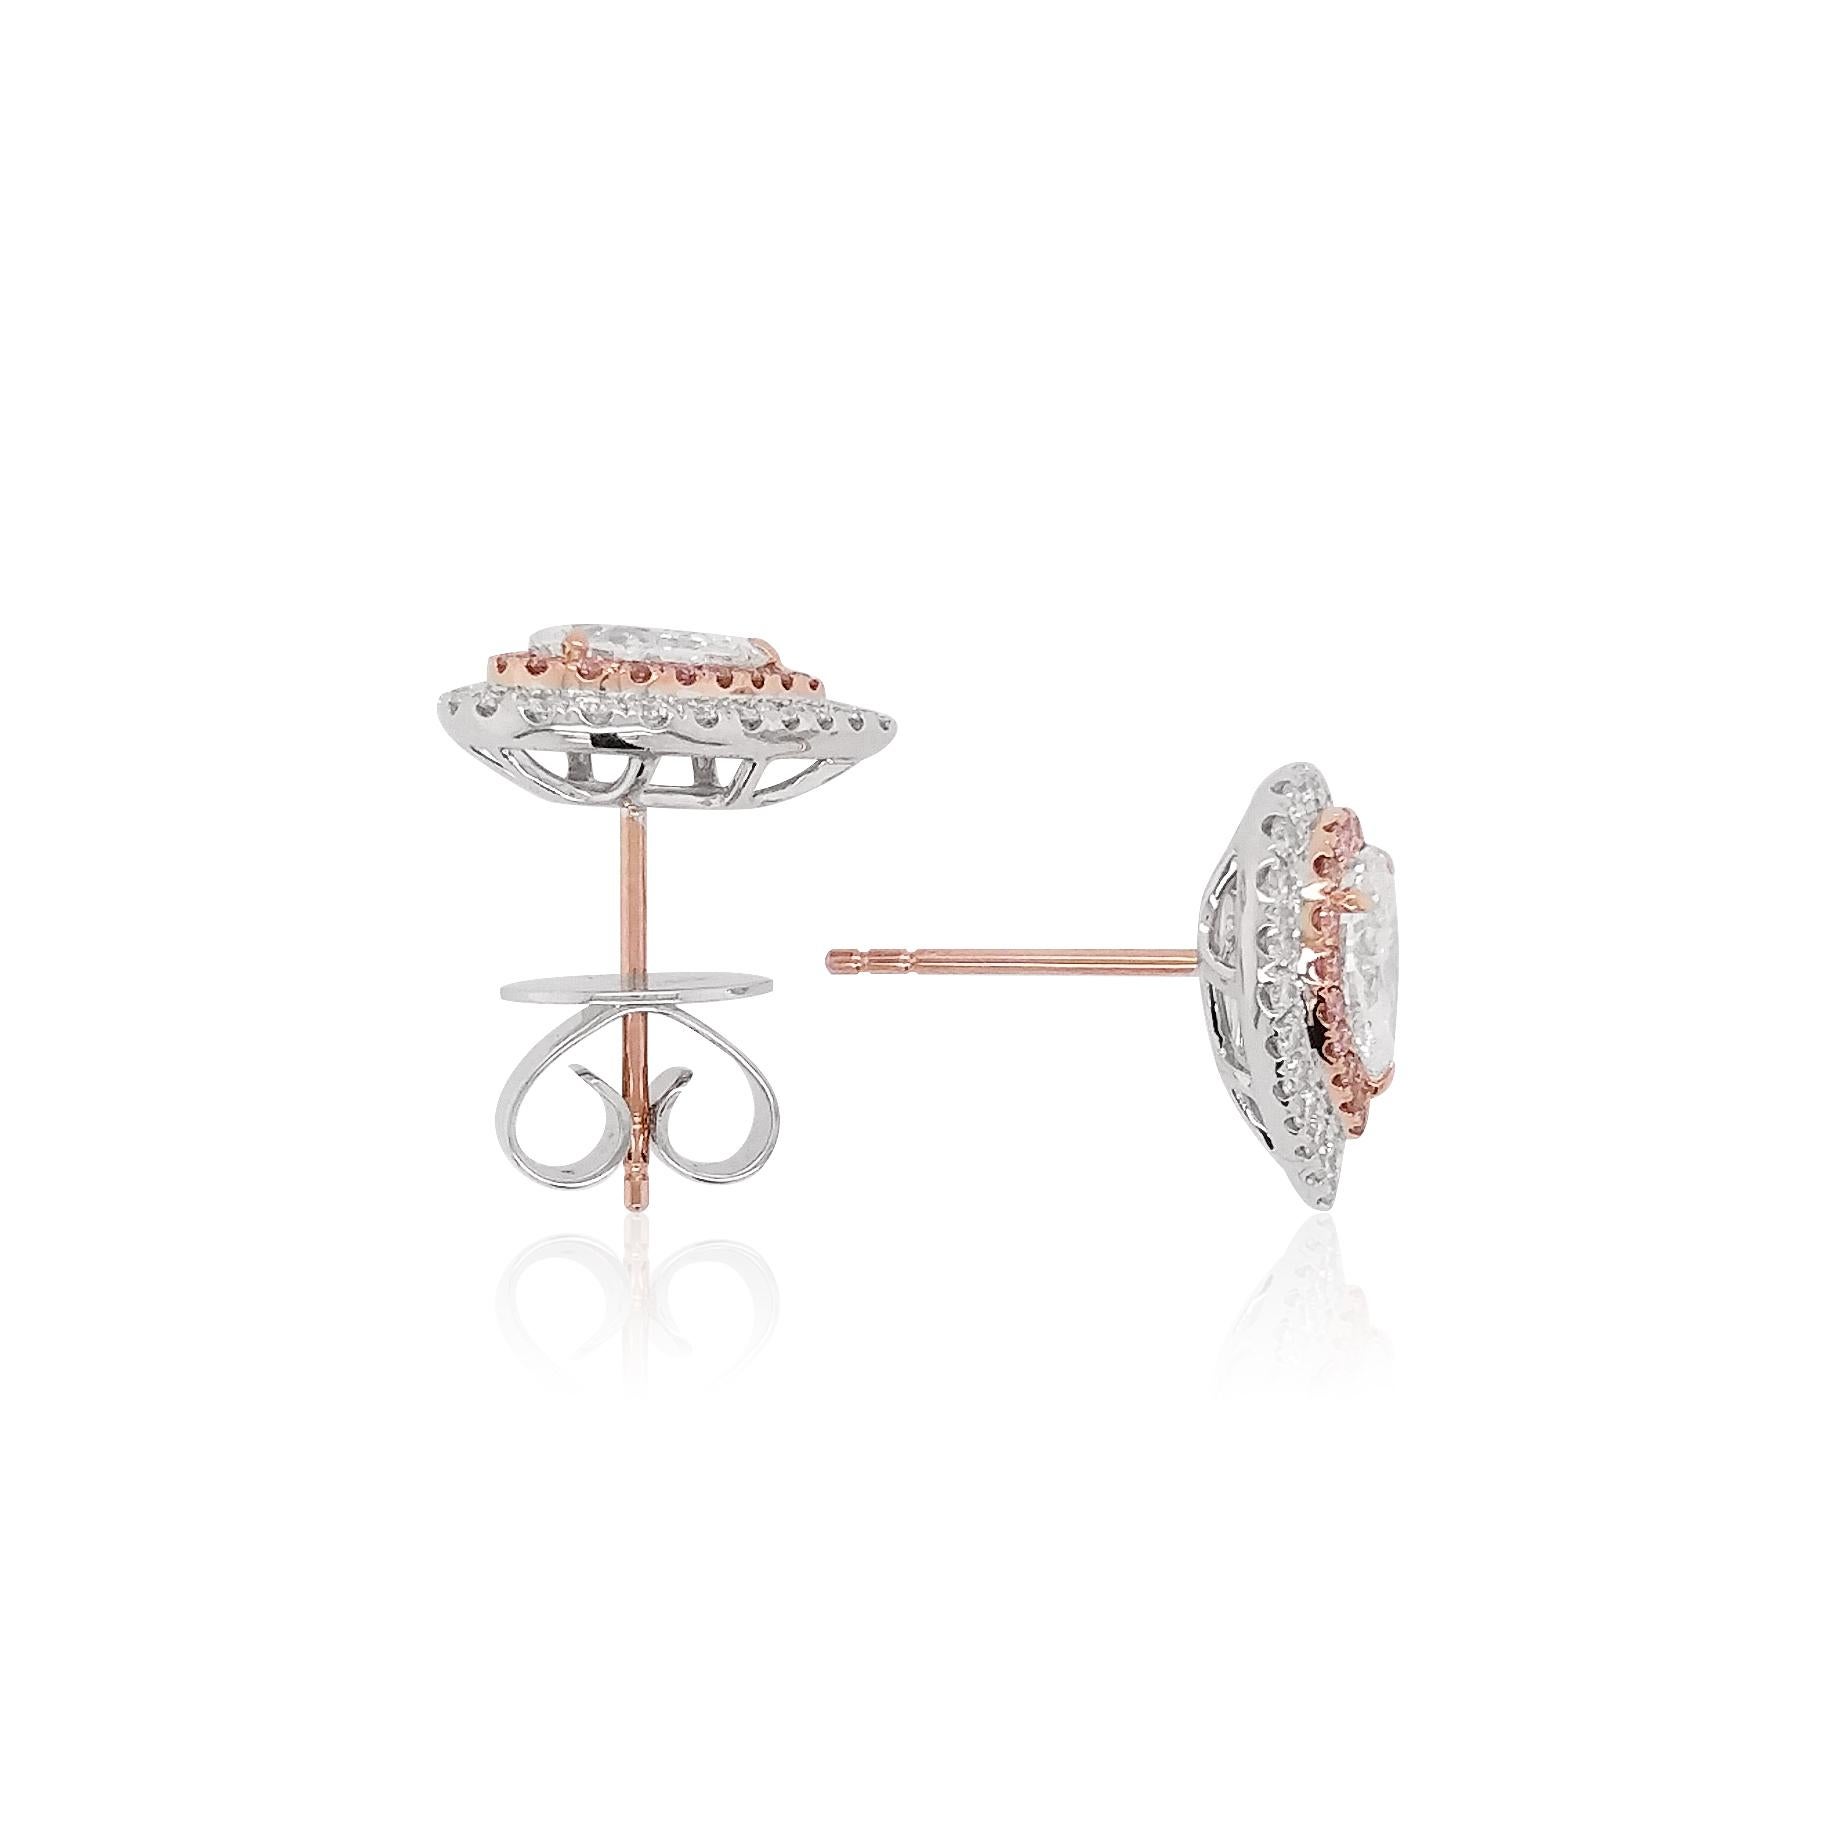 These classic stud earrings feature perfectly matched natural White Diamonds and Argyle Pink Diamonds which have been selected by experts for their superior surface quality and lustre. Elegant in any context, these timeless studs will add a playful